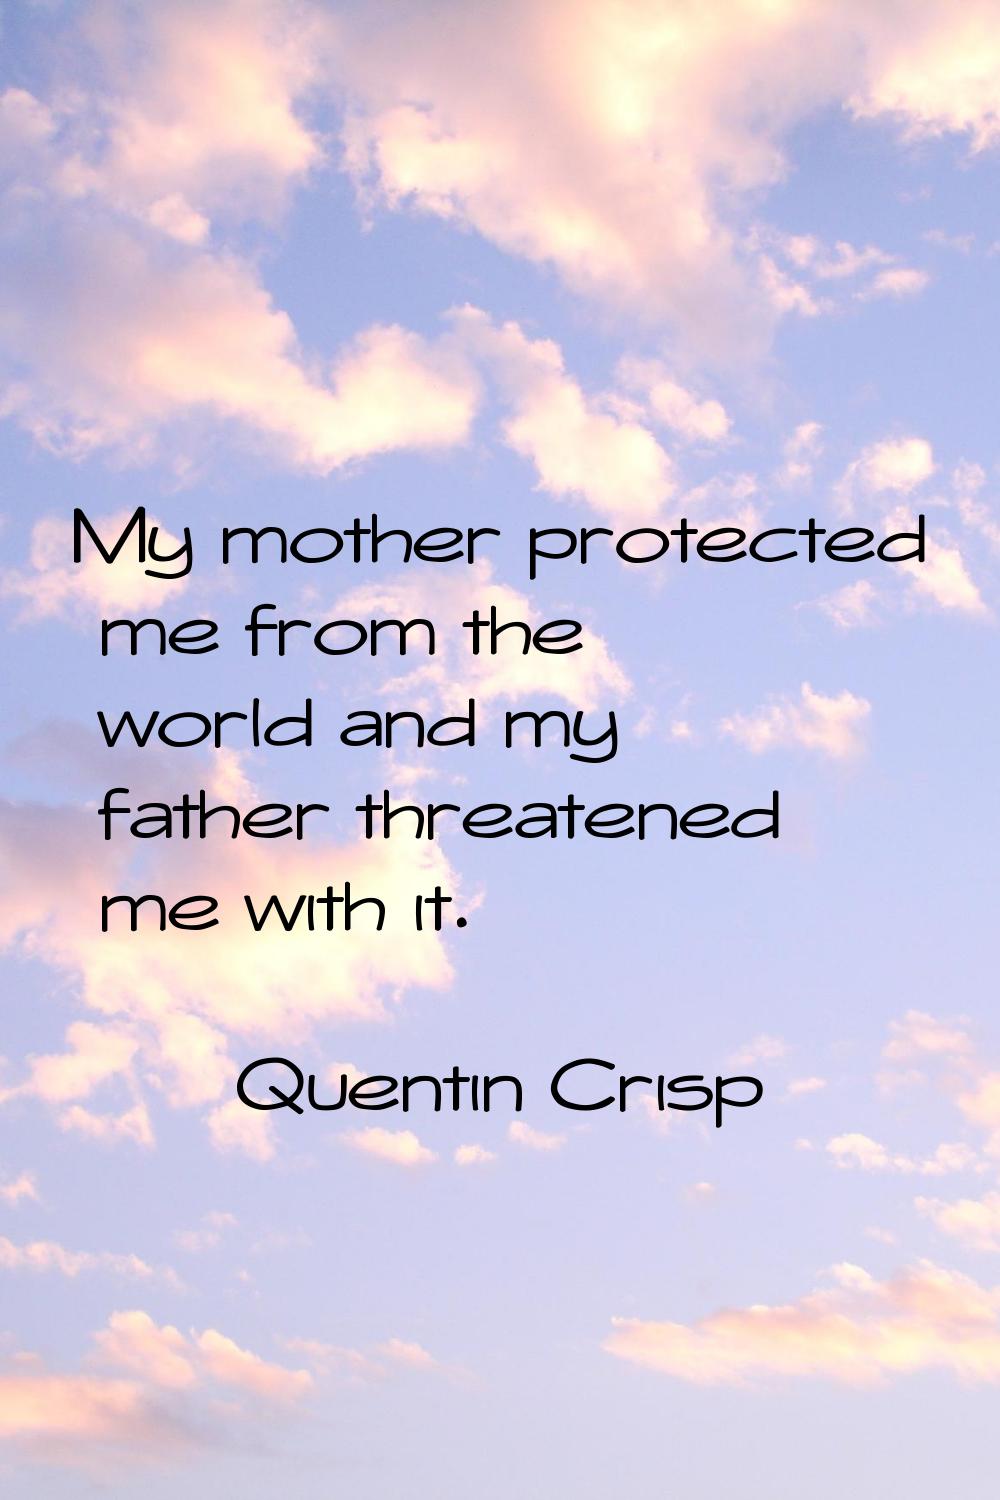 My mother protected me from the world and my father threatened me with it.